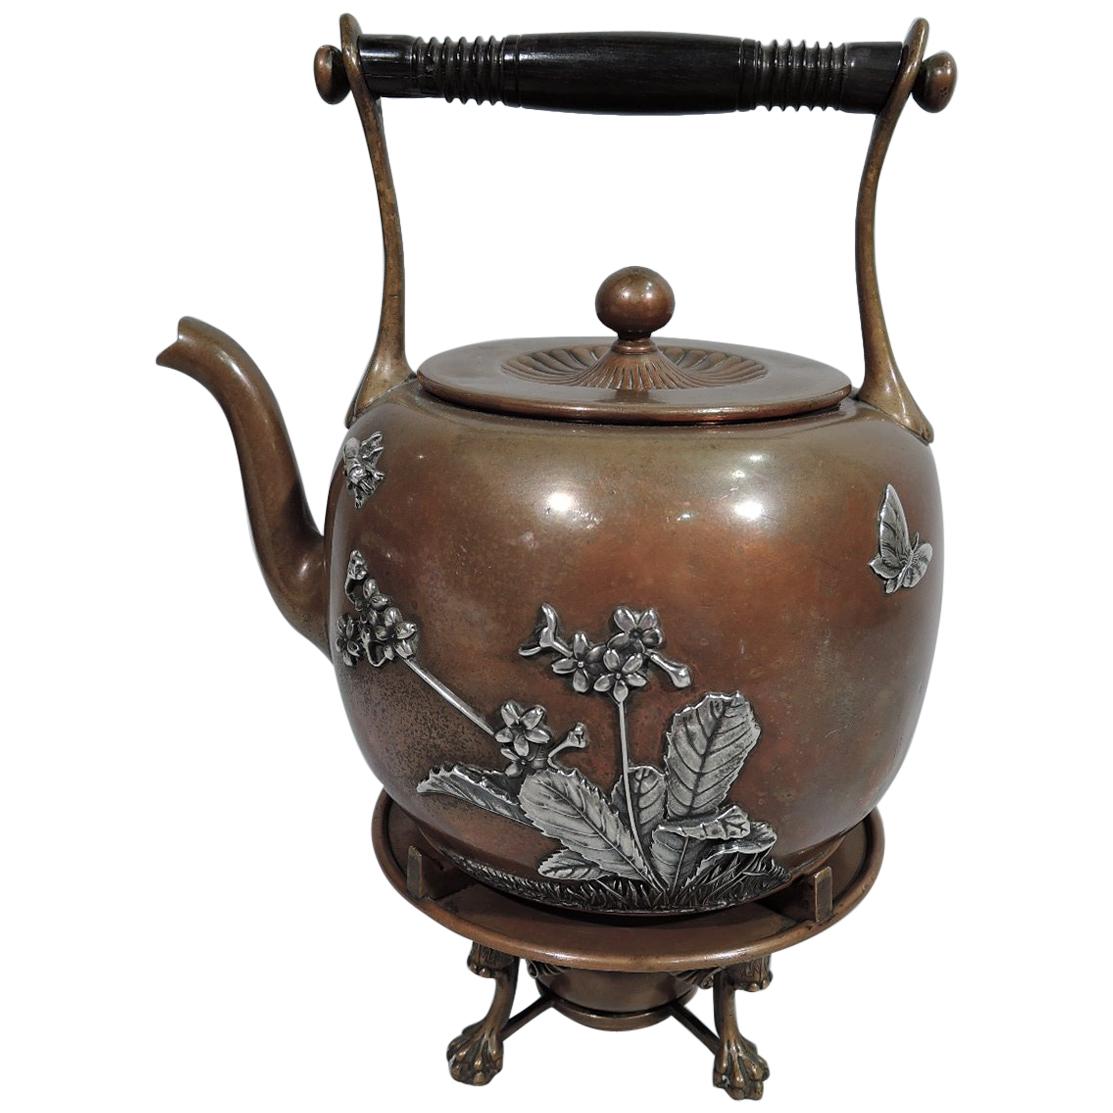 Gorham Aesthetic Japonesque Mixed Metal on Copper Tea Kettle on Stand